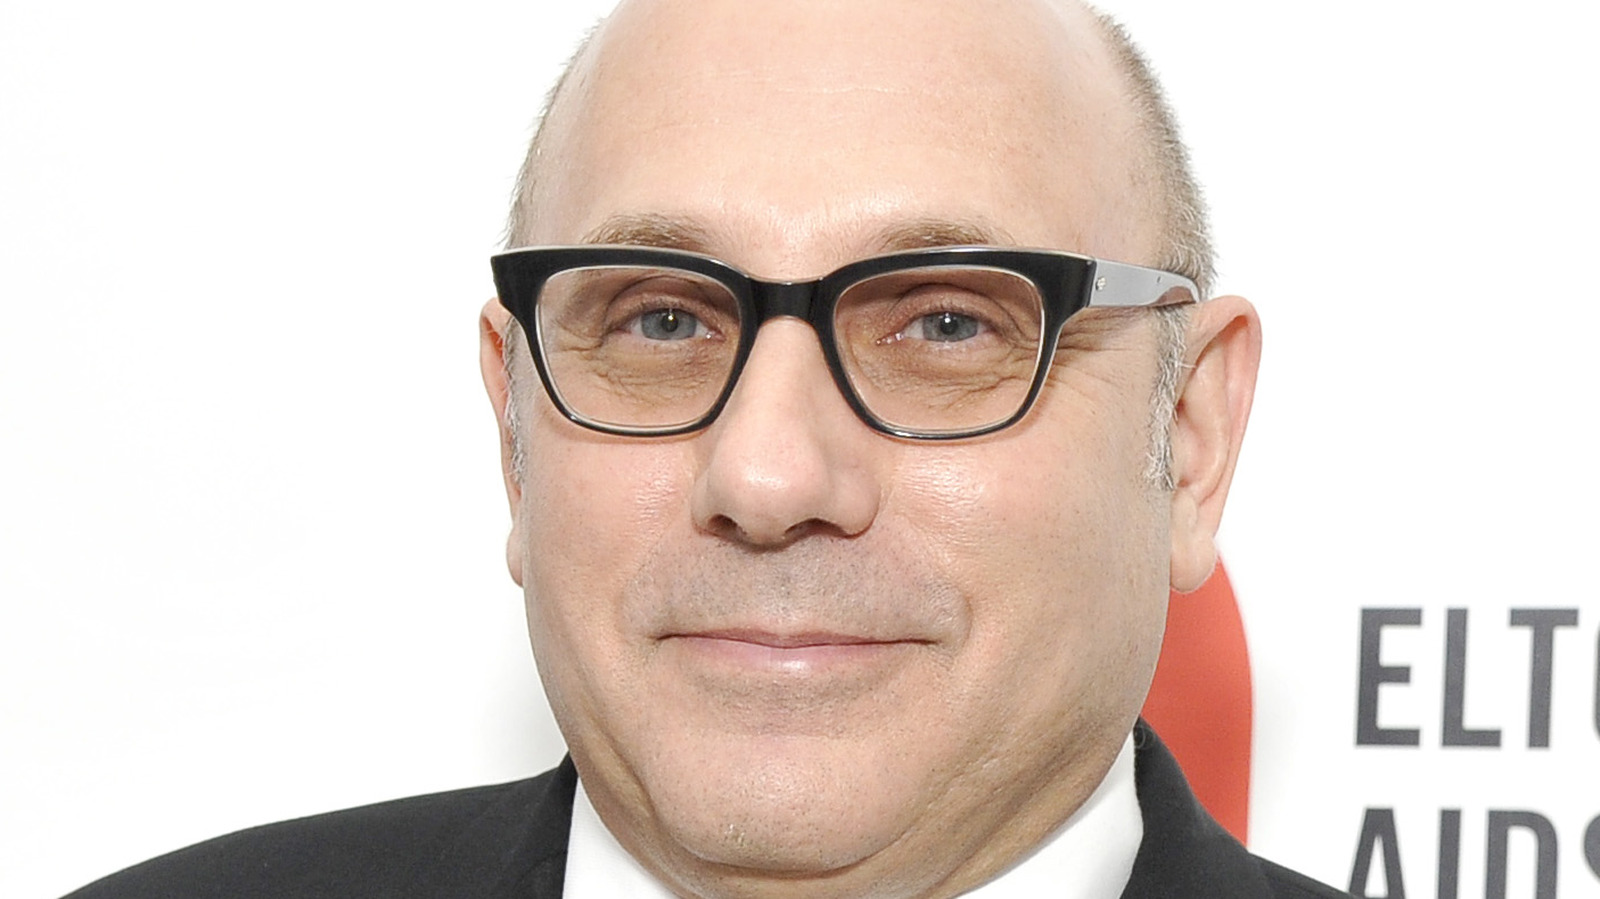 Willie Garson’s Cause Of Death Has Been Revealed